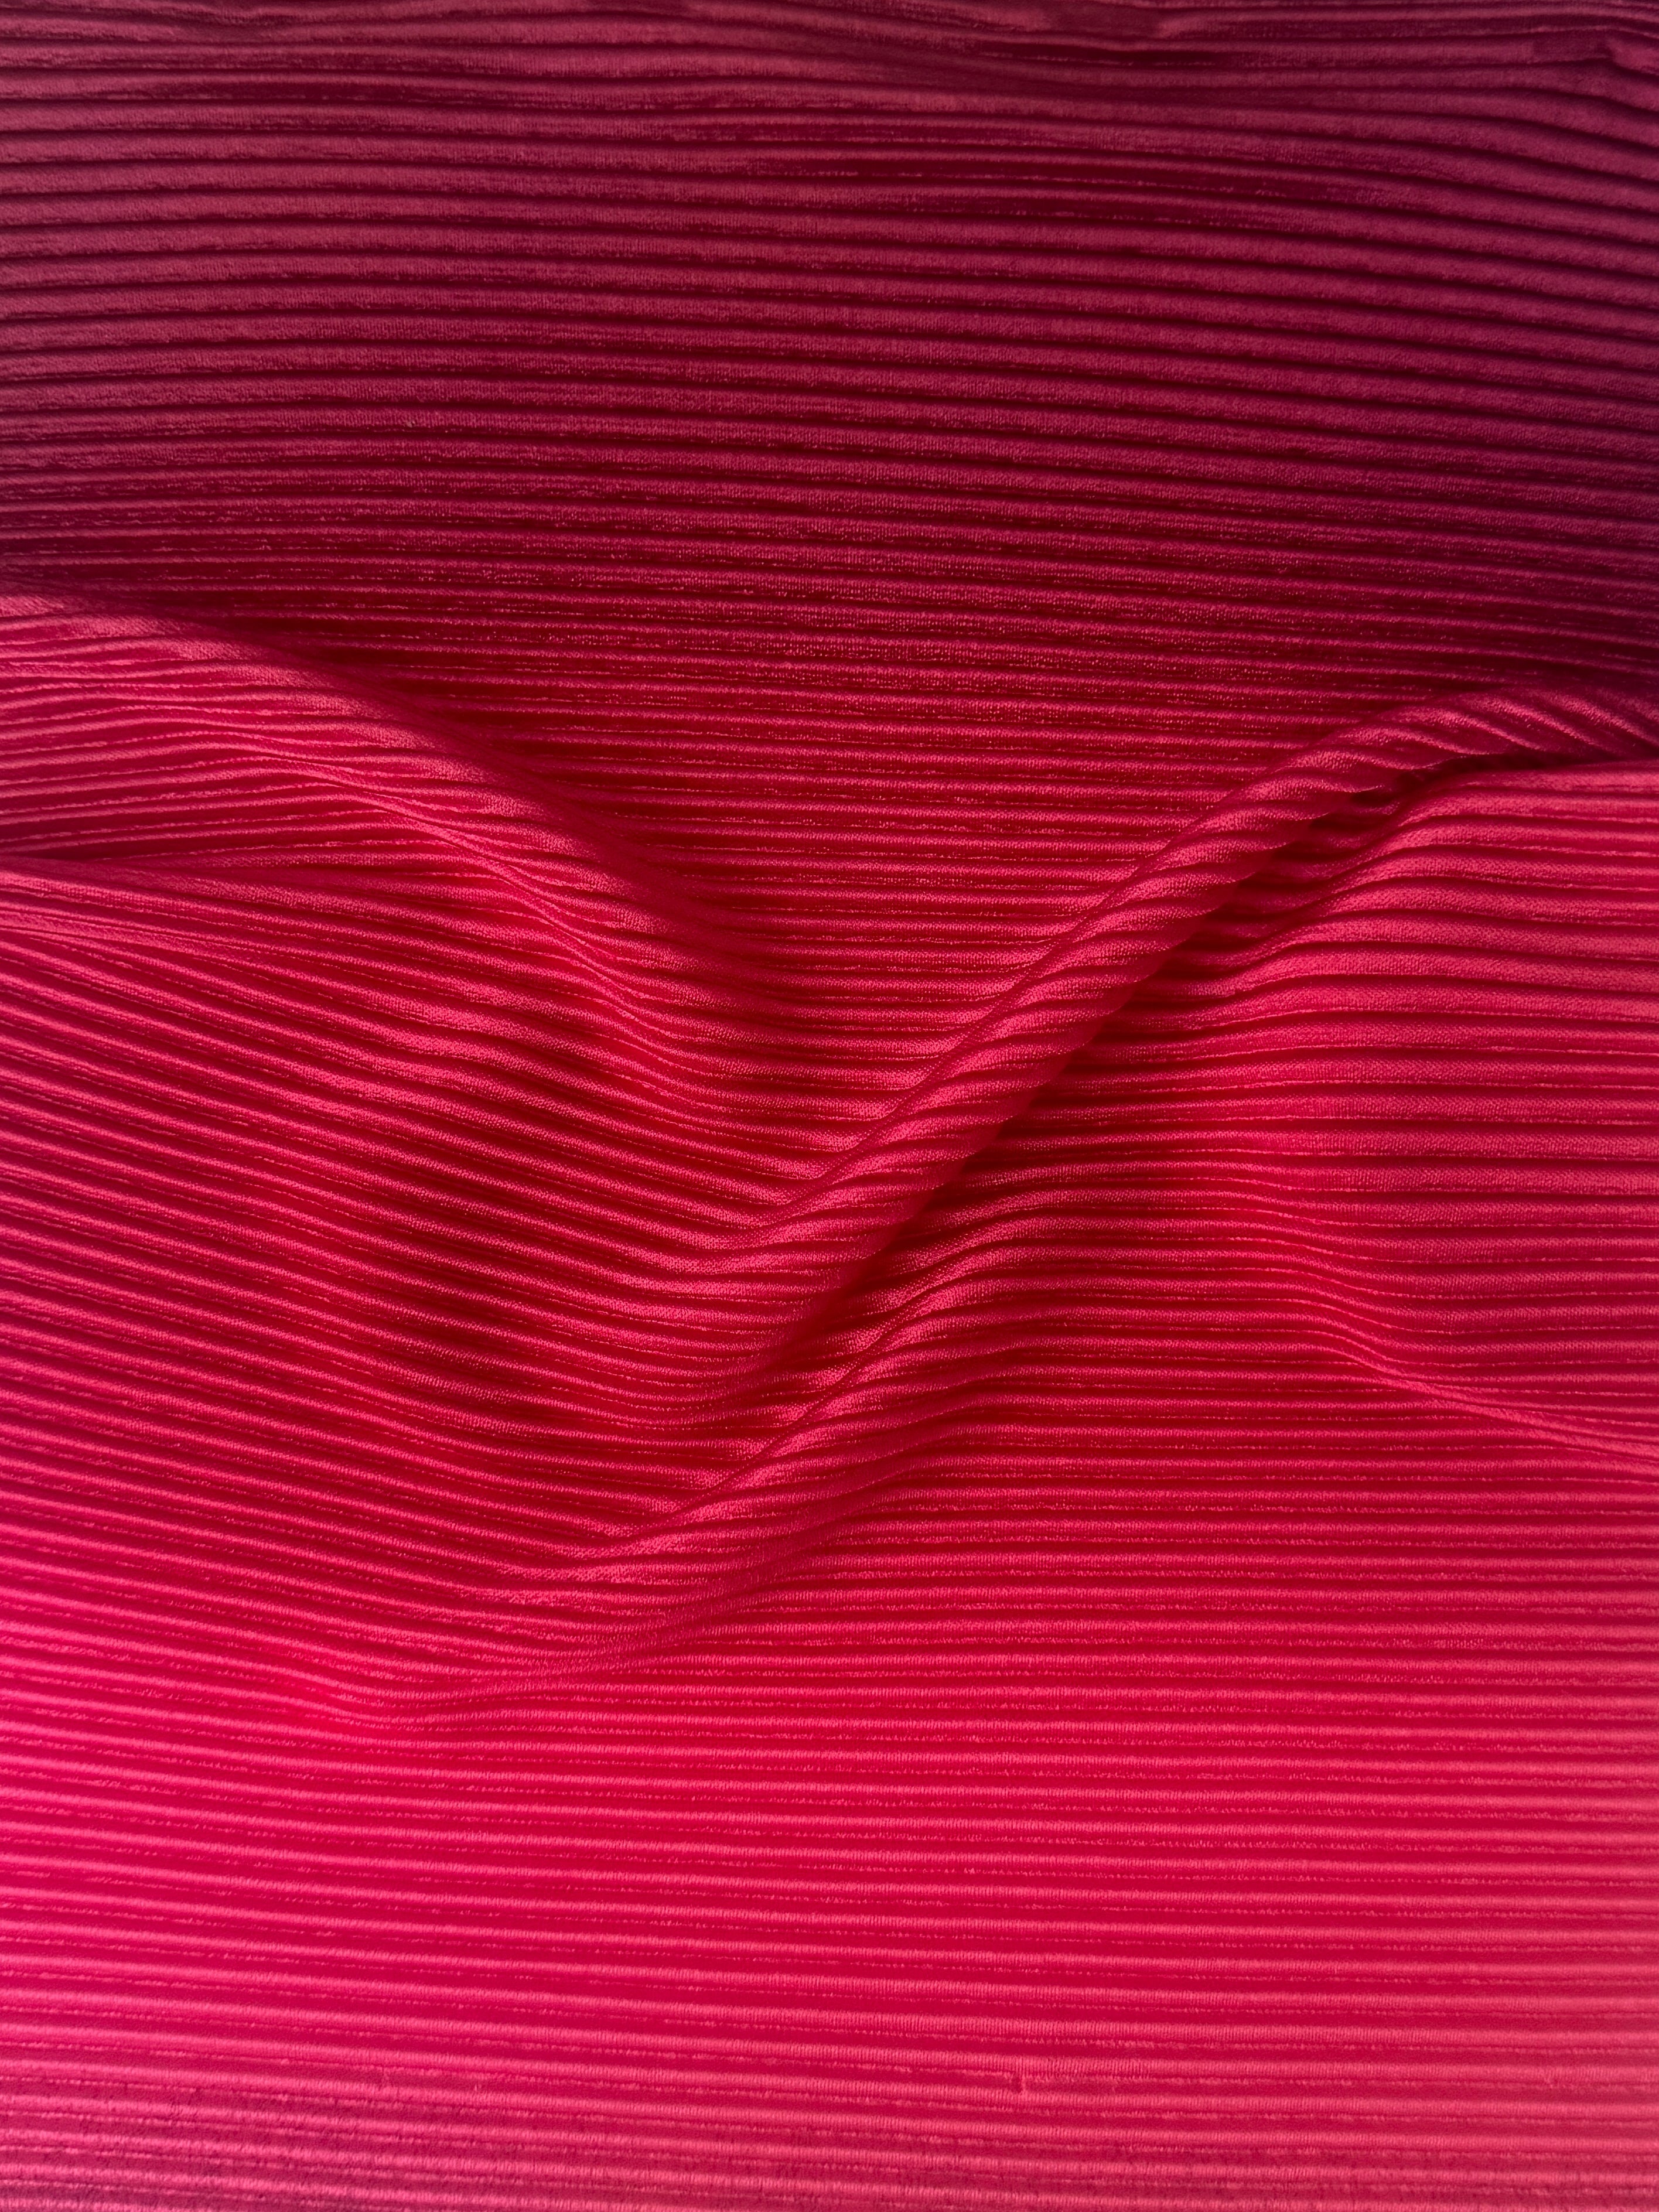 Red Ombre Pleated Knit, red pleated knit, red pleated fabric, pleated spandex, spandex fabric, kiki textiles, sewing, red textured knit